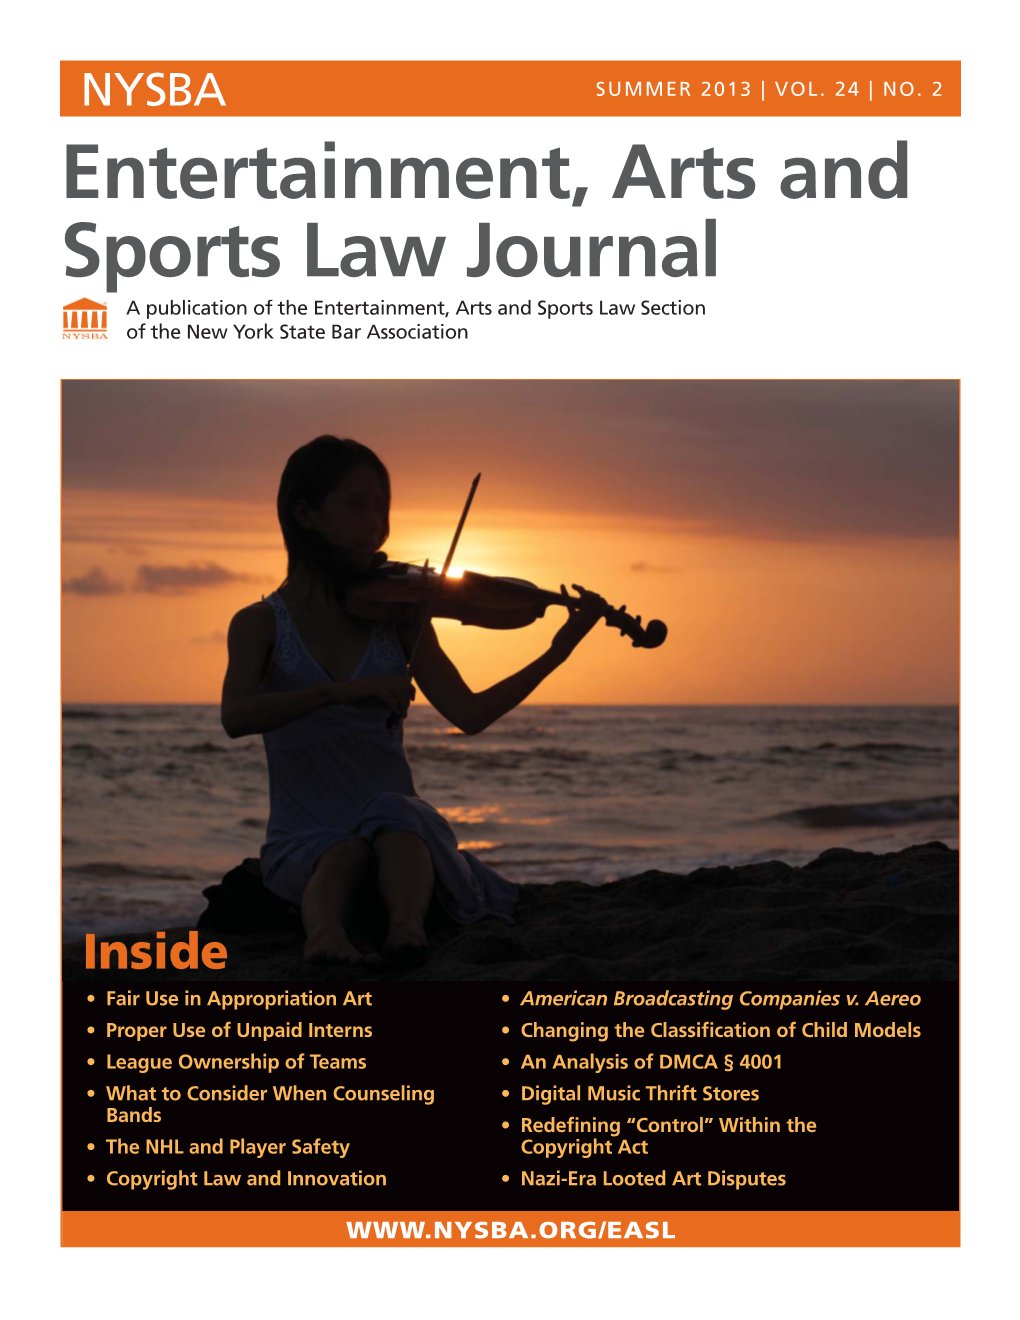 NYSBA Entertainment, Arts and Sports Law Journal | Summer 2013 | Vol